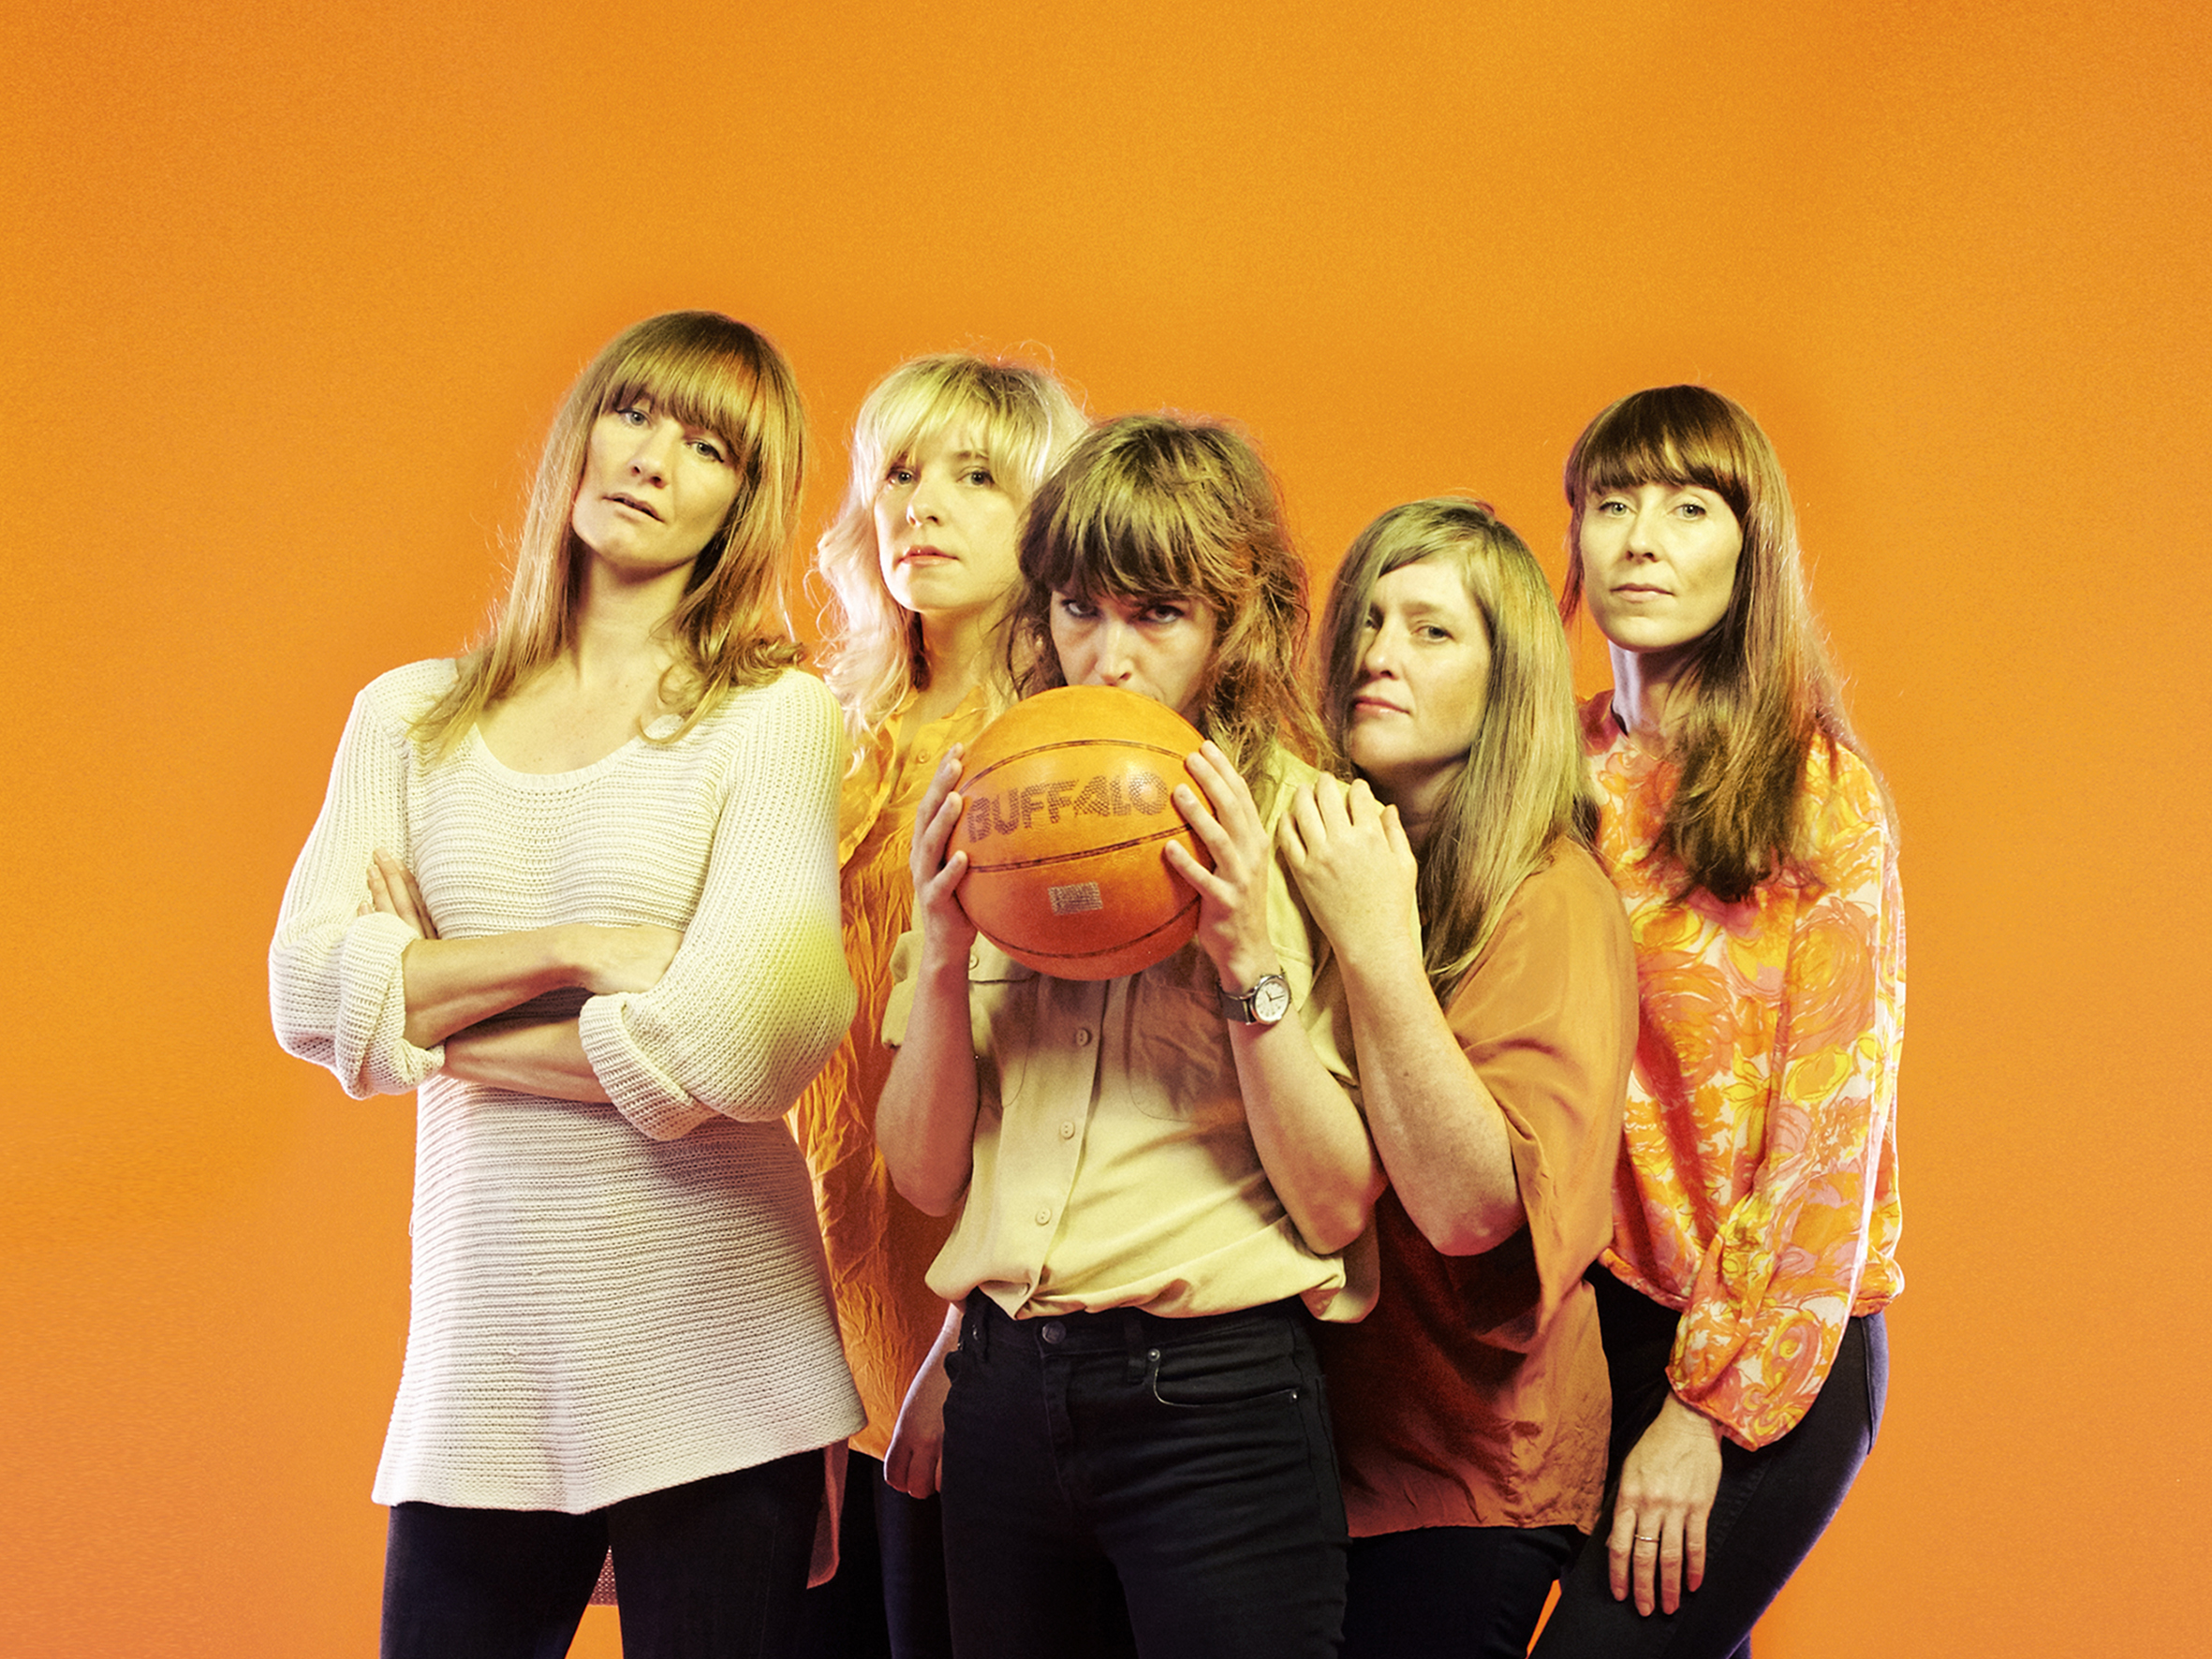 Beaches announce ‘Second Of Spring’ and share first track via Noisey